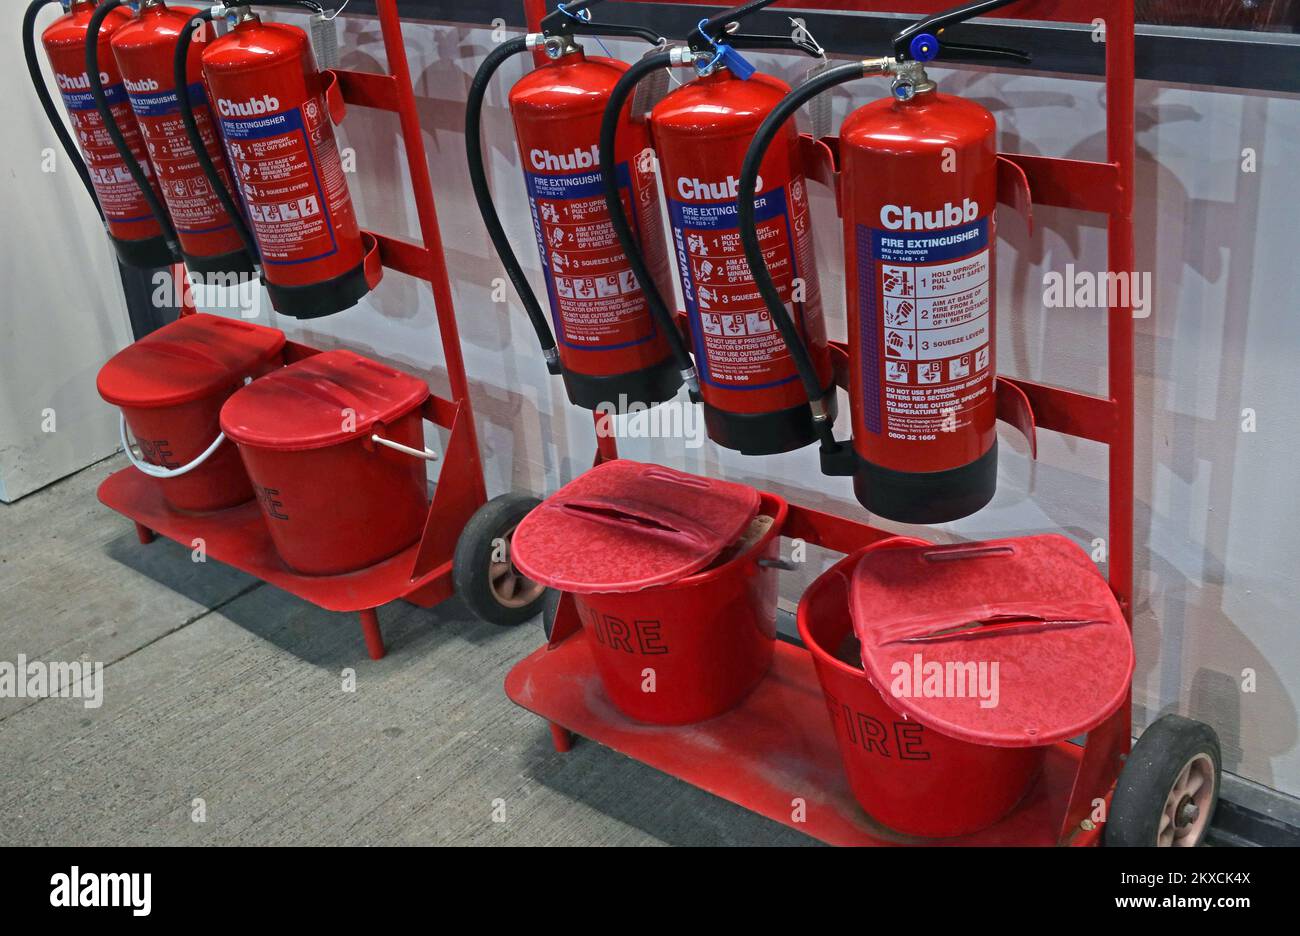 Chubb fire extinguishers and red fire buckets, health and safety Stock Photo